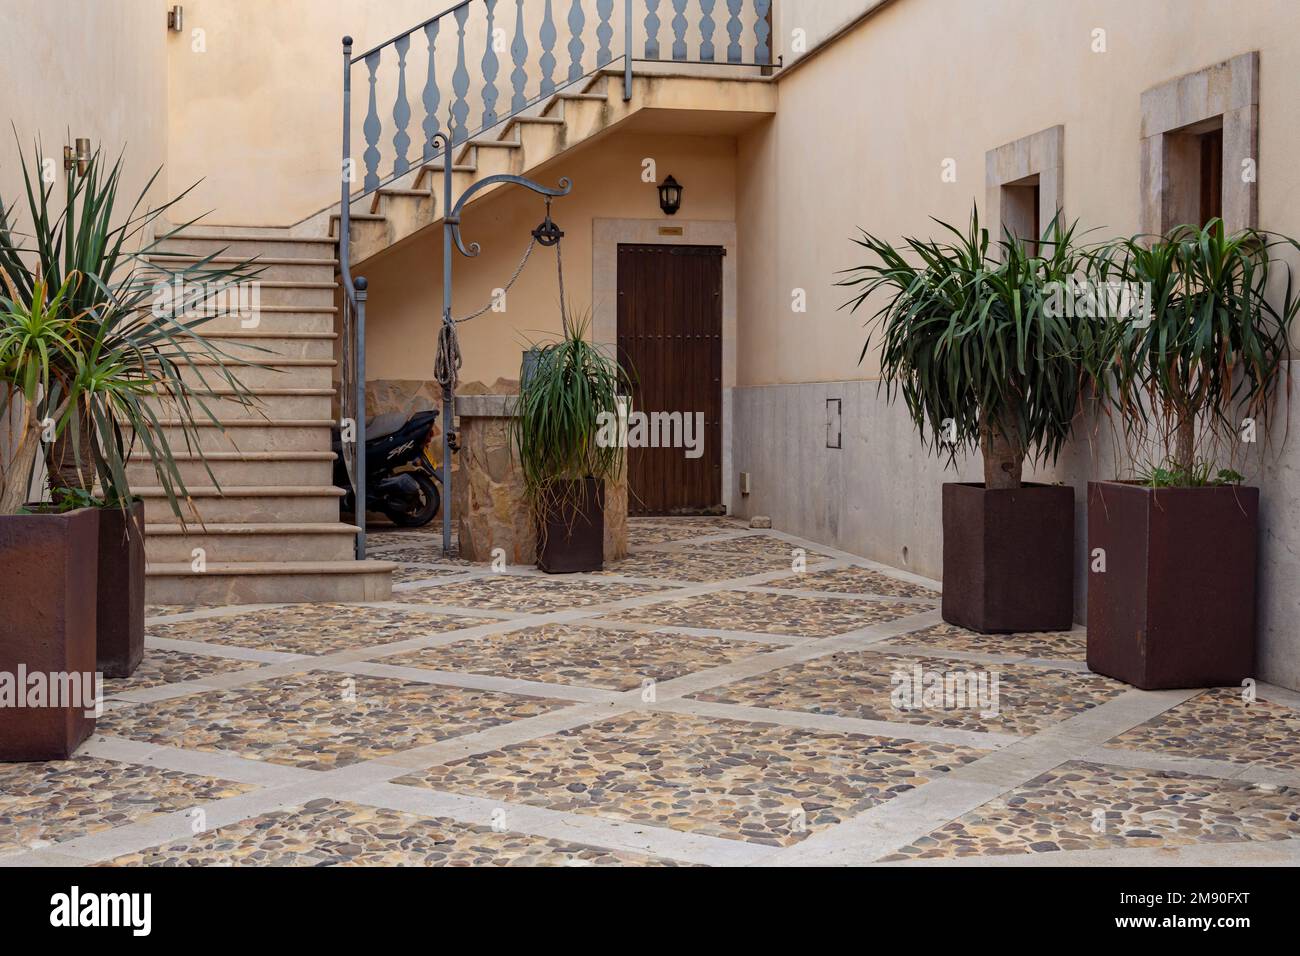 Ca's Concos, Spain; january 13 2023: Main entrance of a restored house on a winter day at sunset. Island of Mallorca, Spain Stock Photo